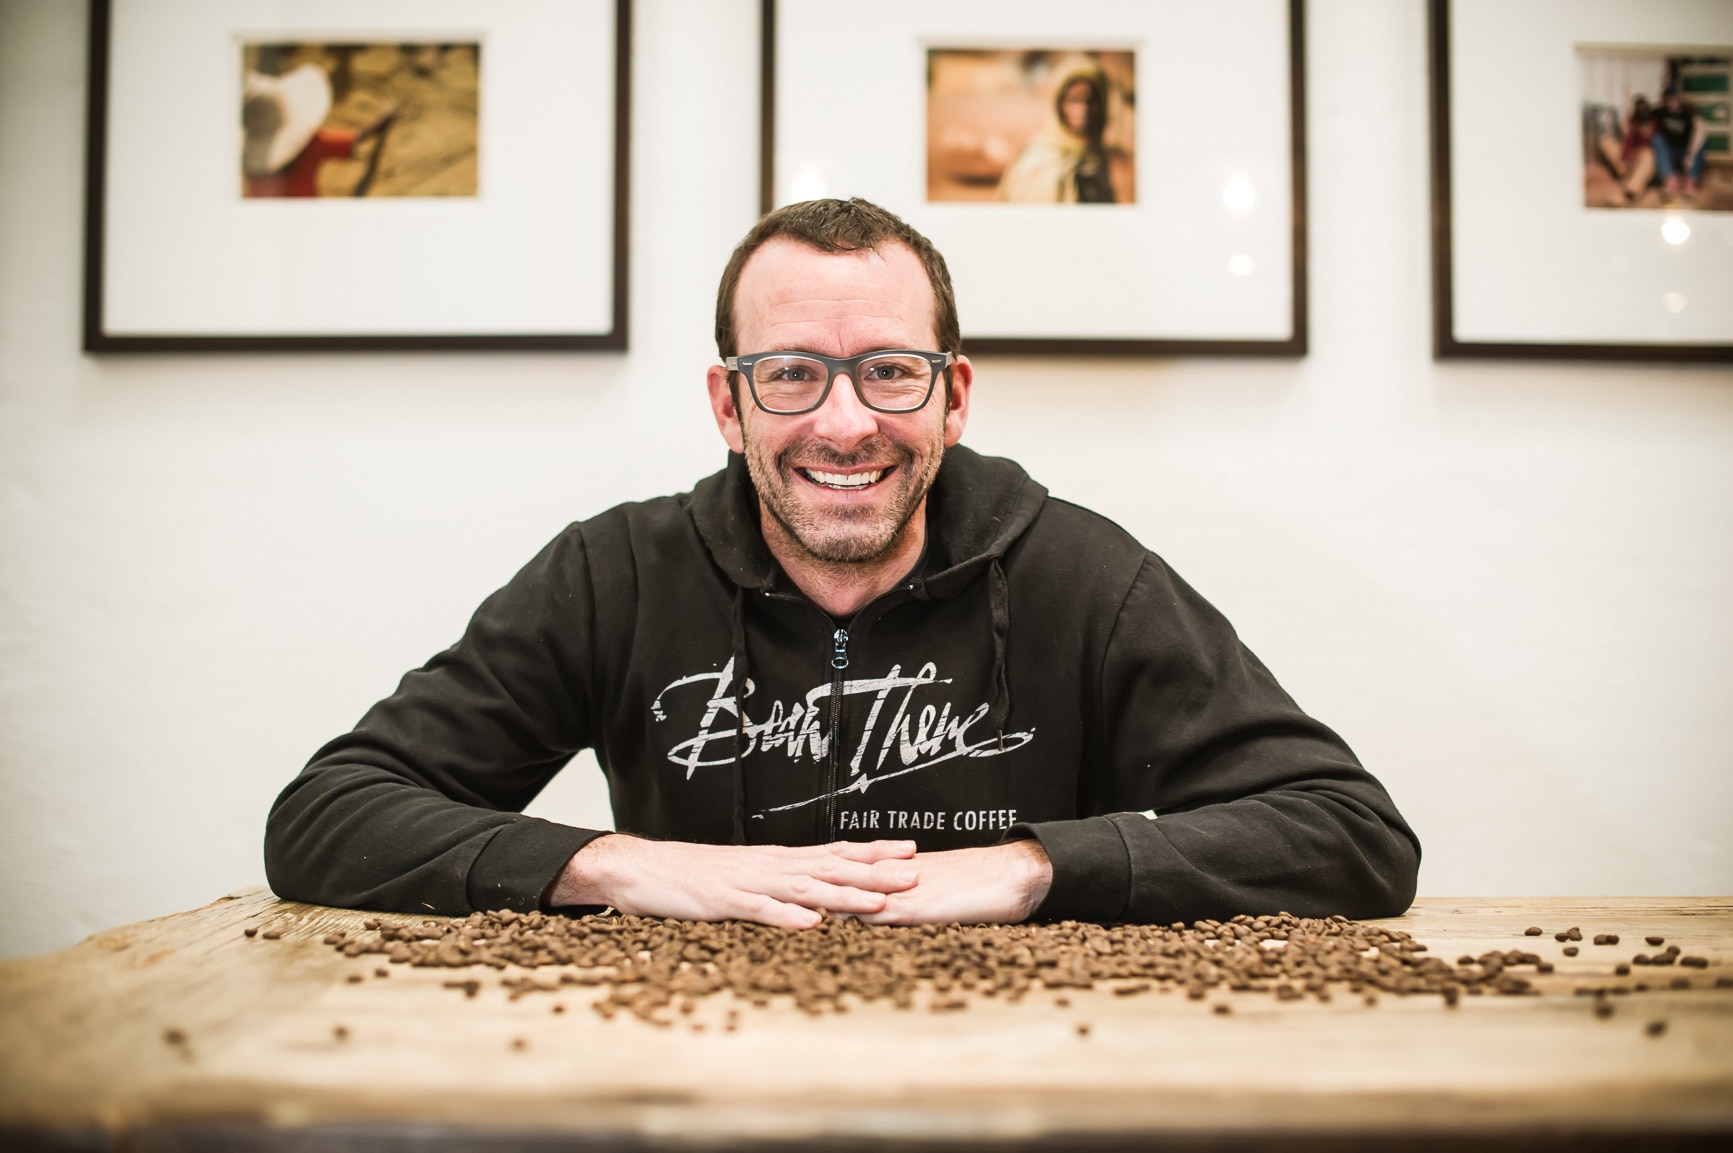 The harsh realities of being an entrepreneur. He first had to deal with the dot-com crash, now his coffee business is being hit by the COVID-19 tsunami